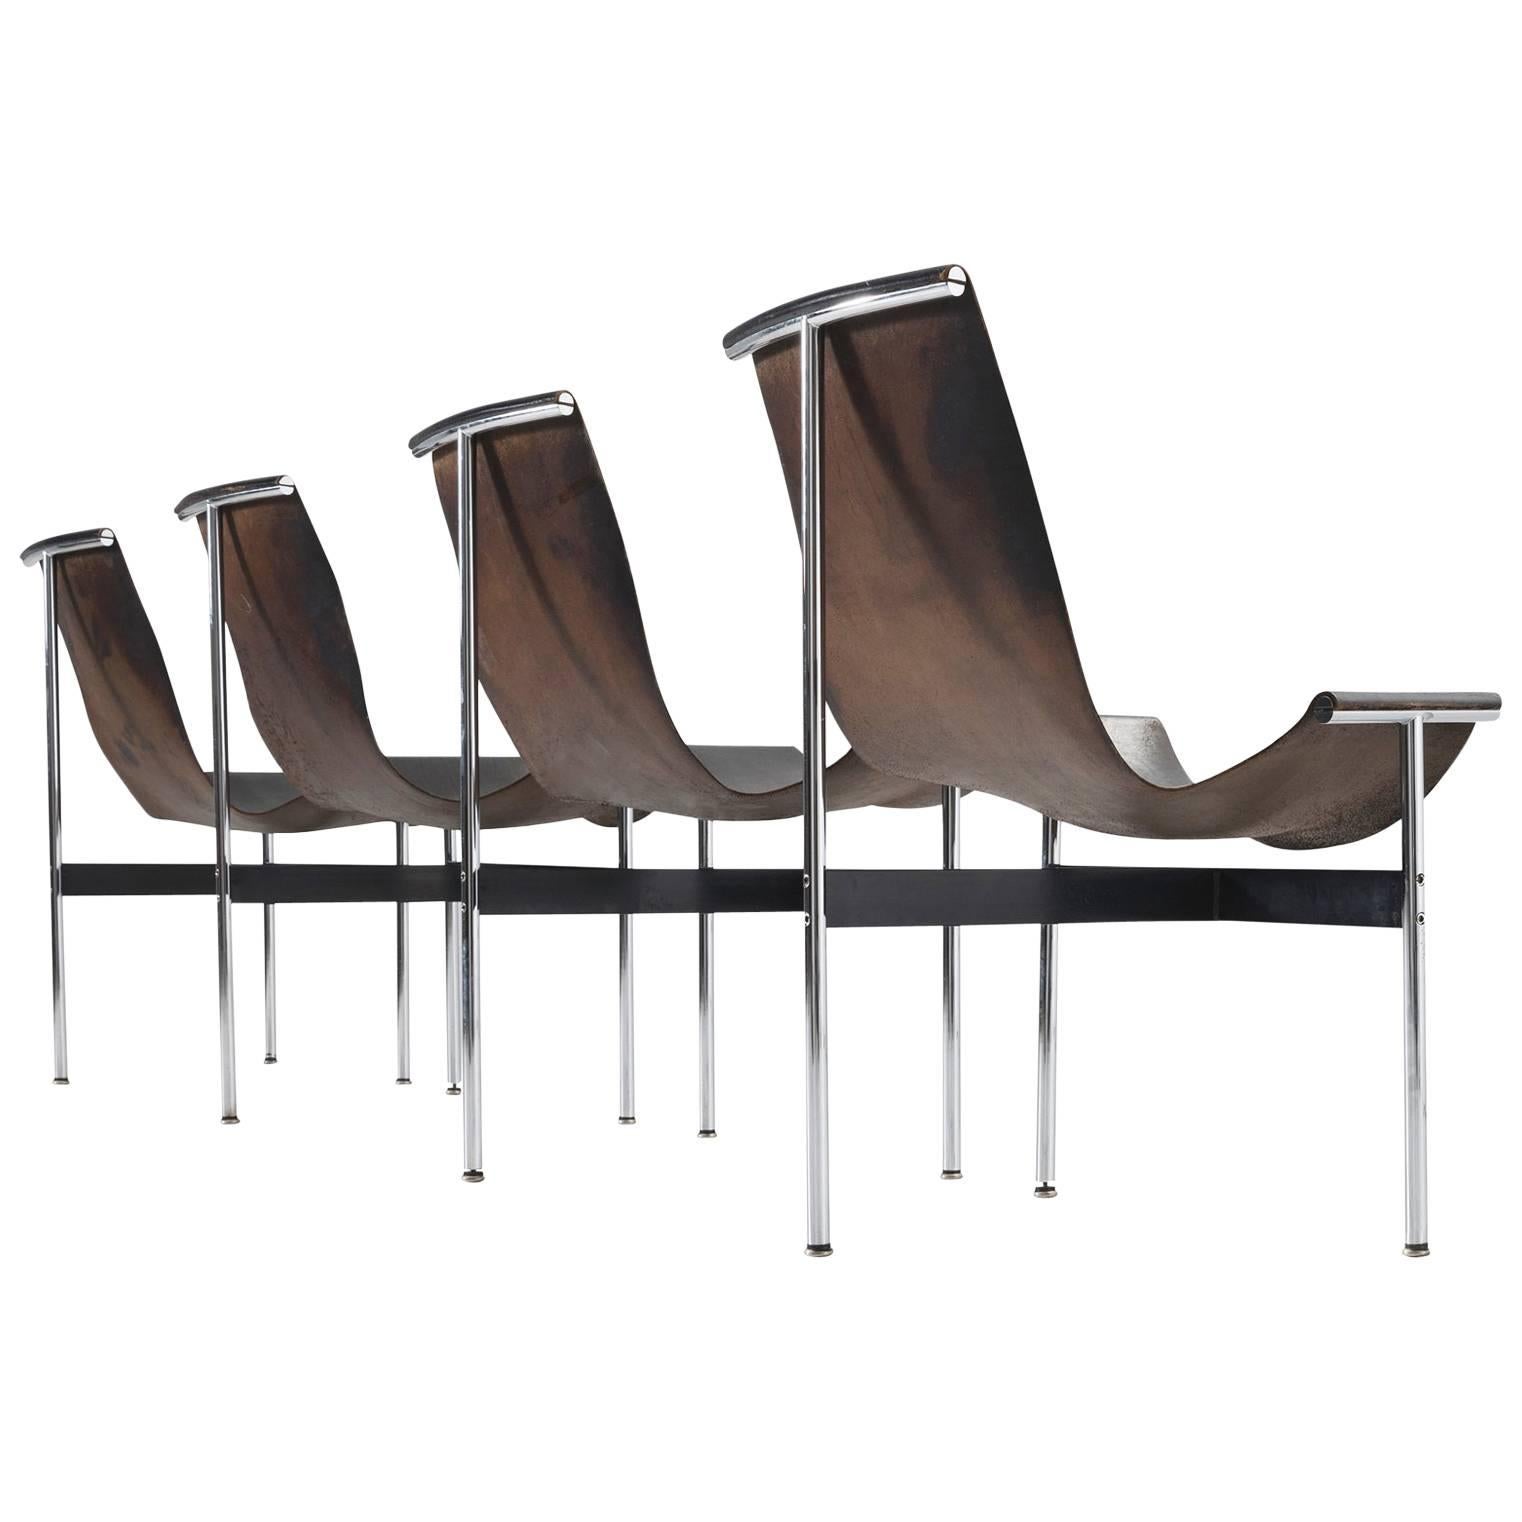 Katalovos T Chairs in Original Black Leather